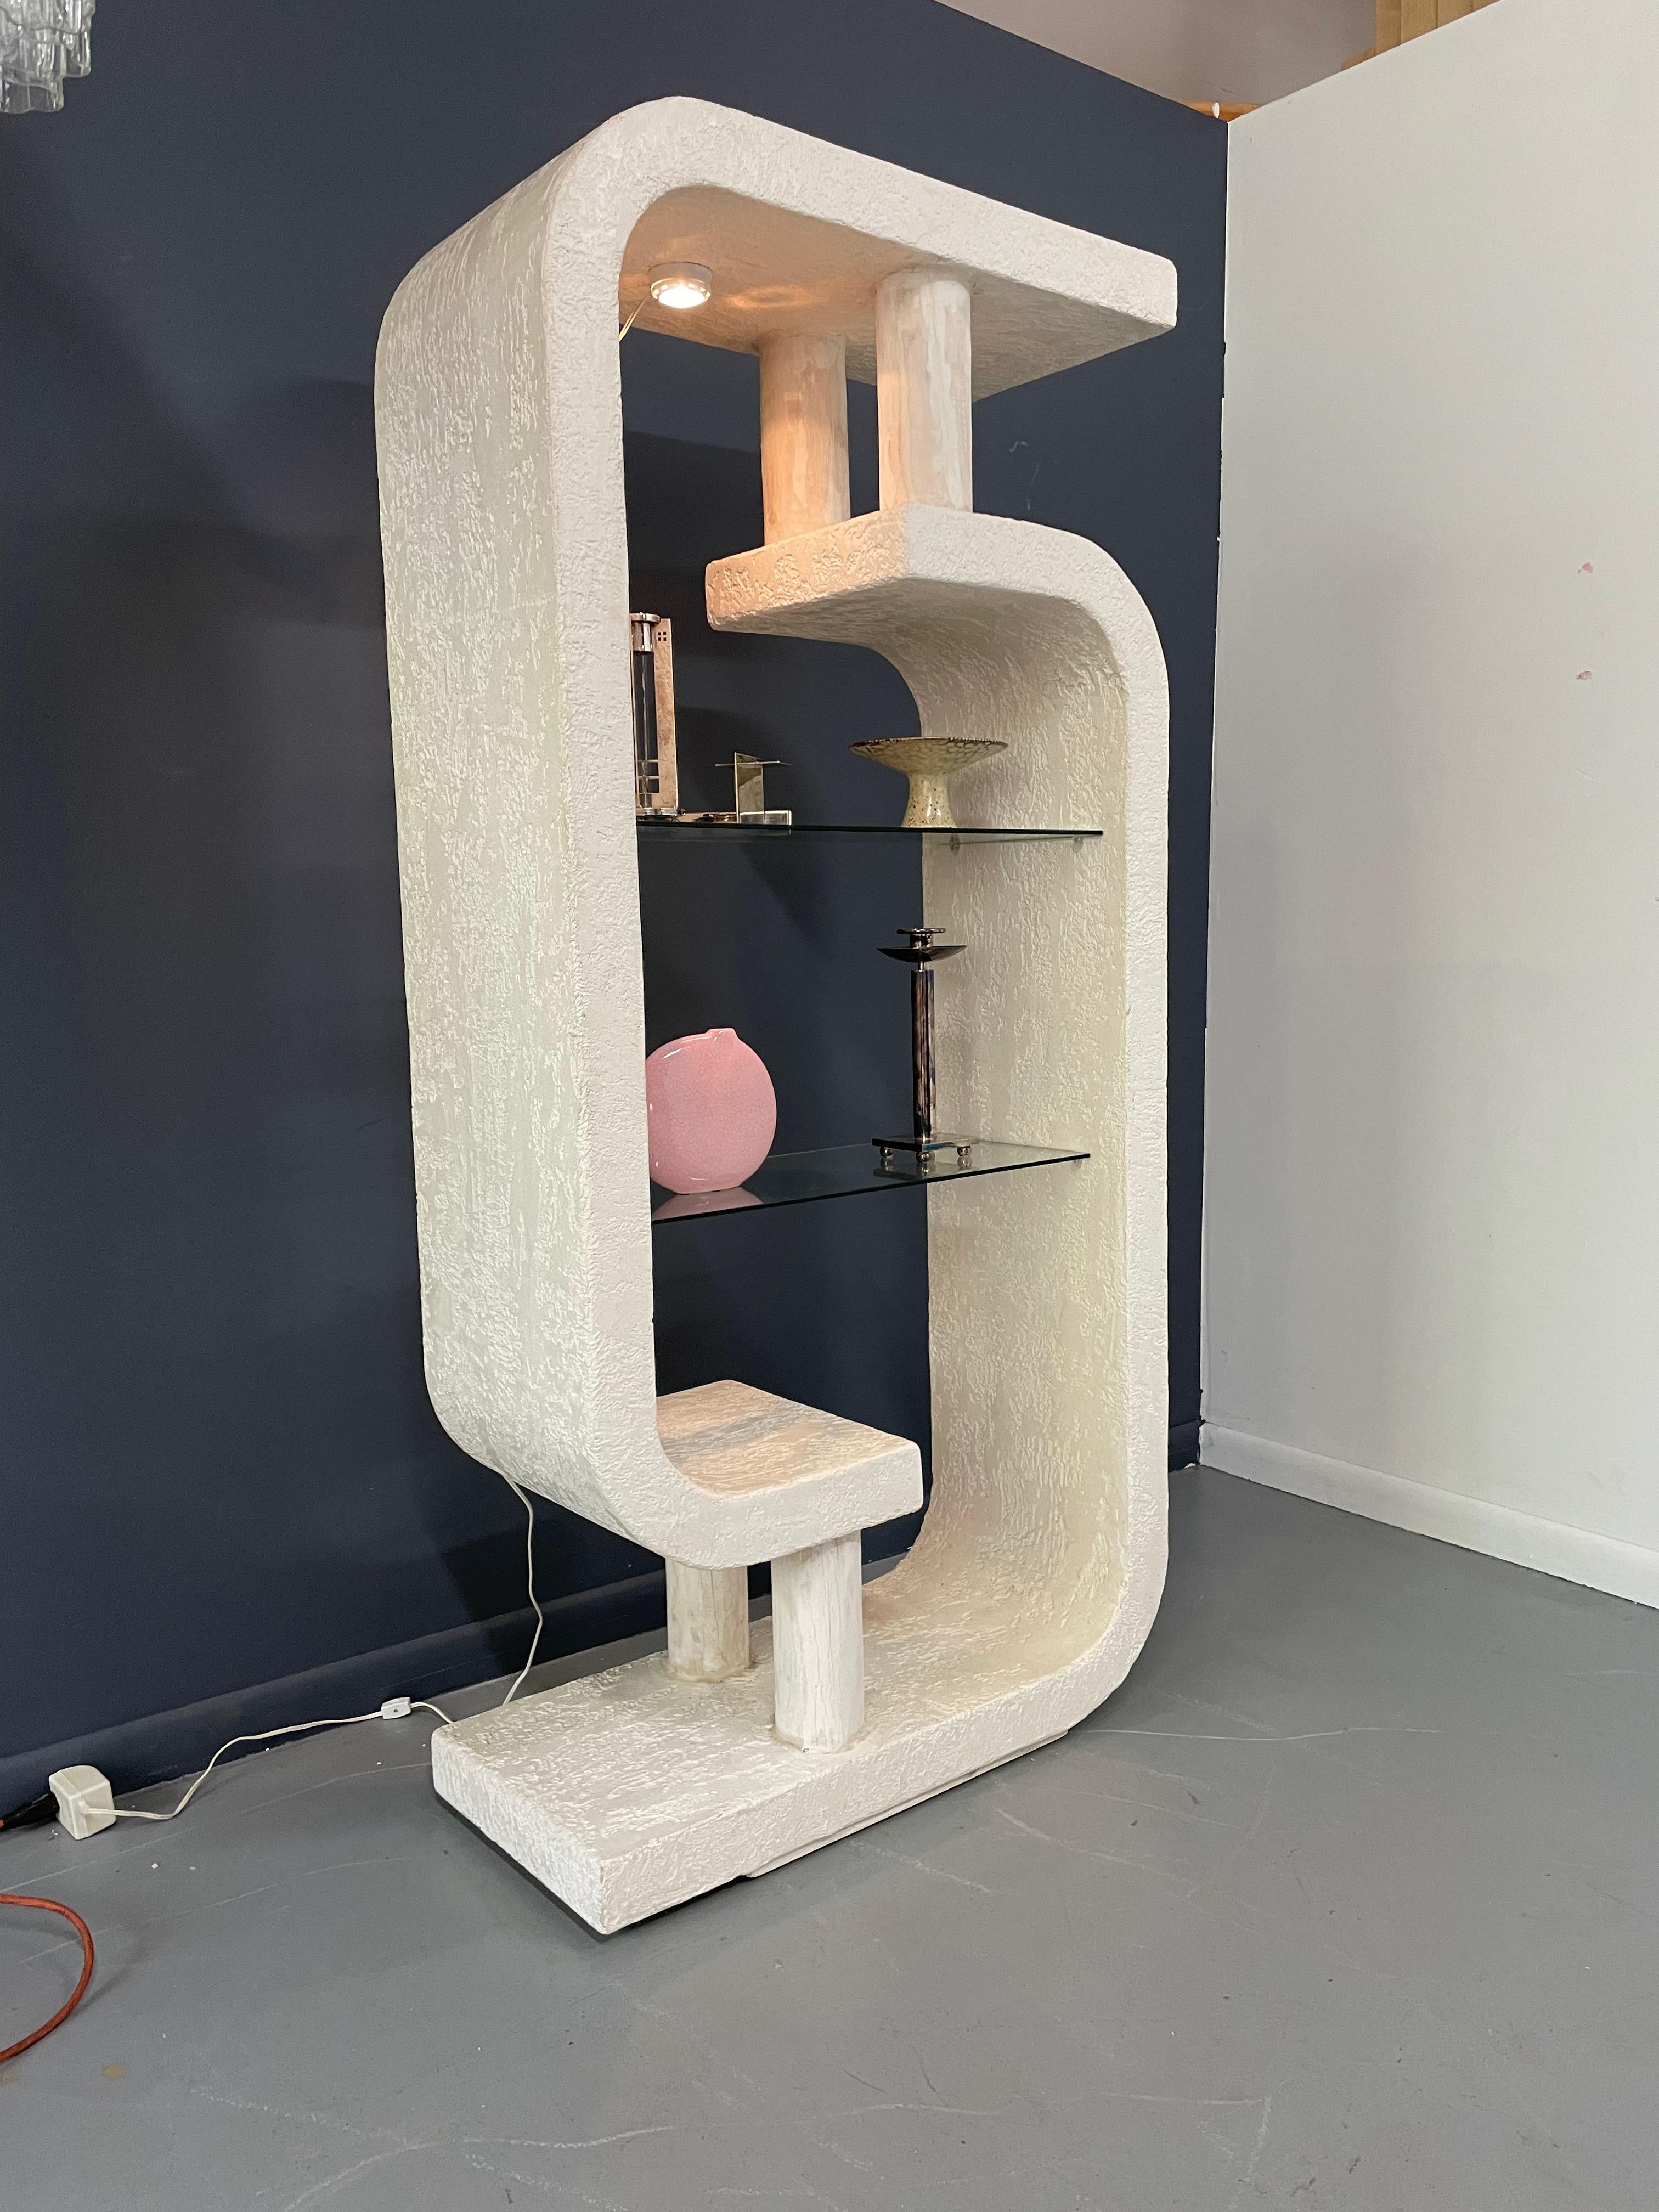 This sculptural shelf features a curved frame made of two C shaped pieces which are connected via two wood cylinders at the top and bottom. The two glass shelves can be illuminated from above.